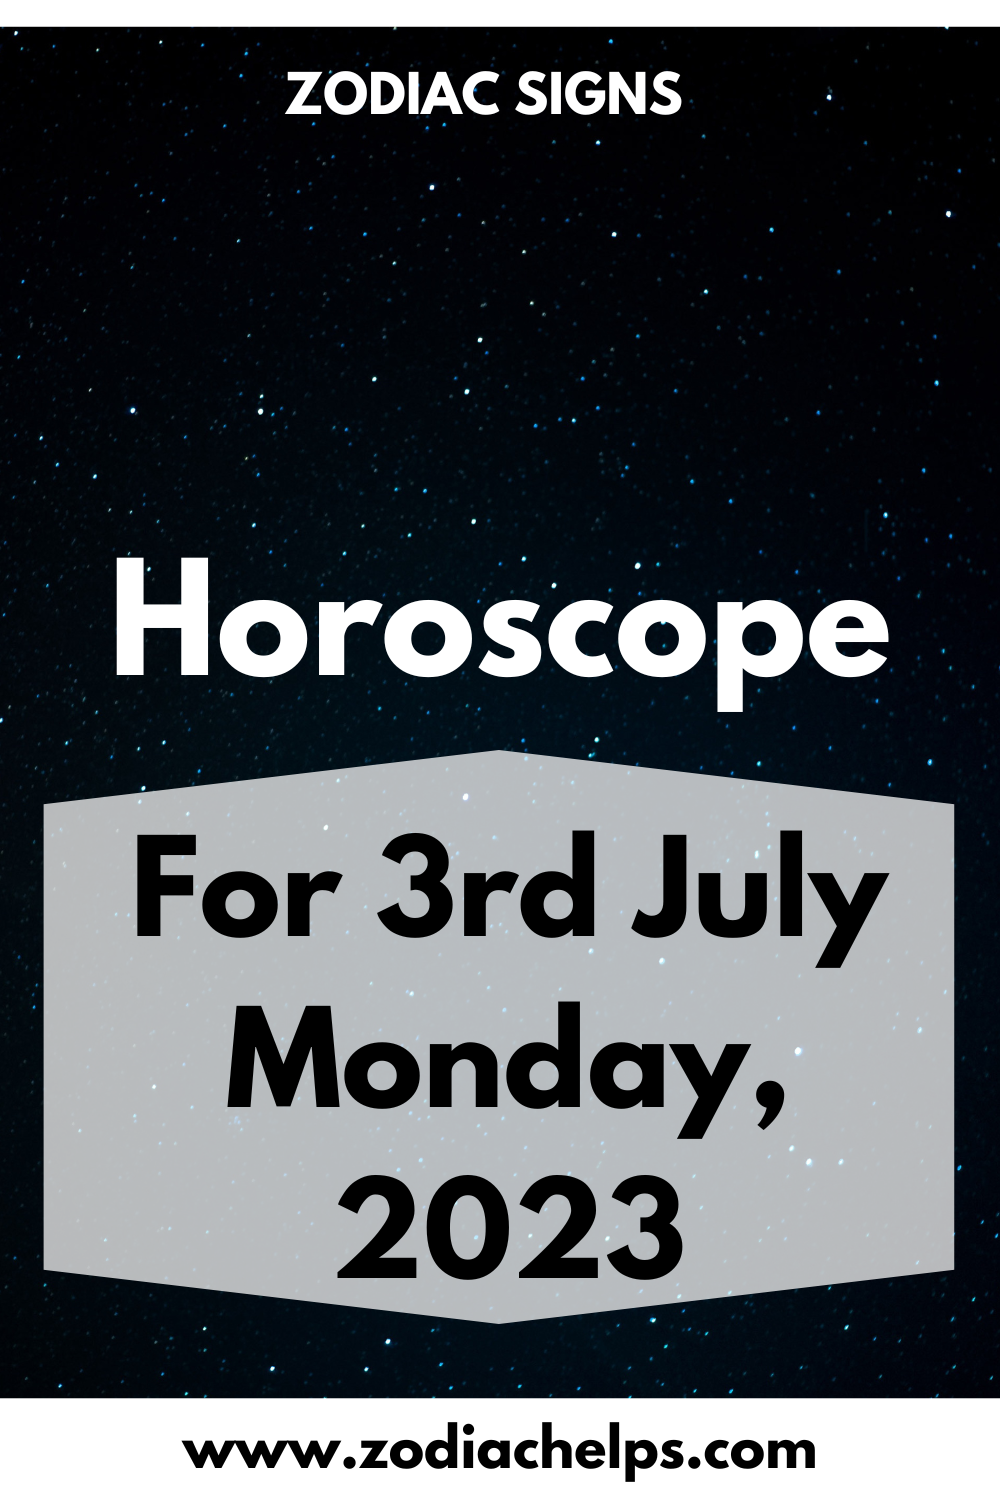 Horoscope for 3rd July Monday, 2023